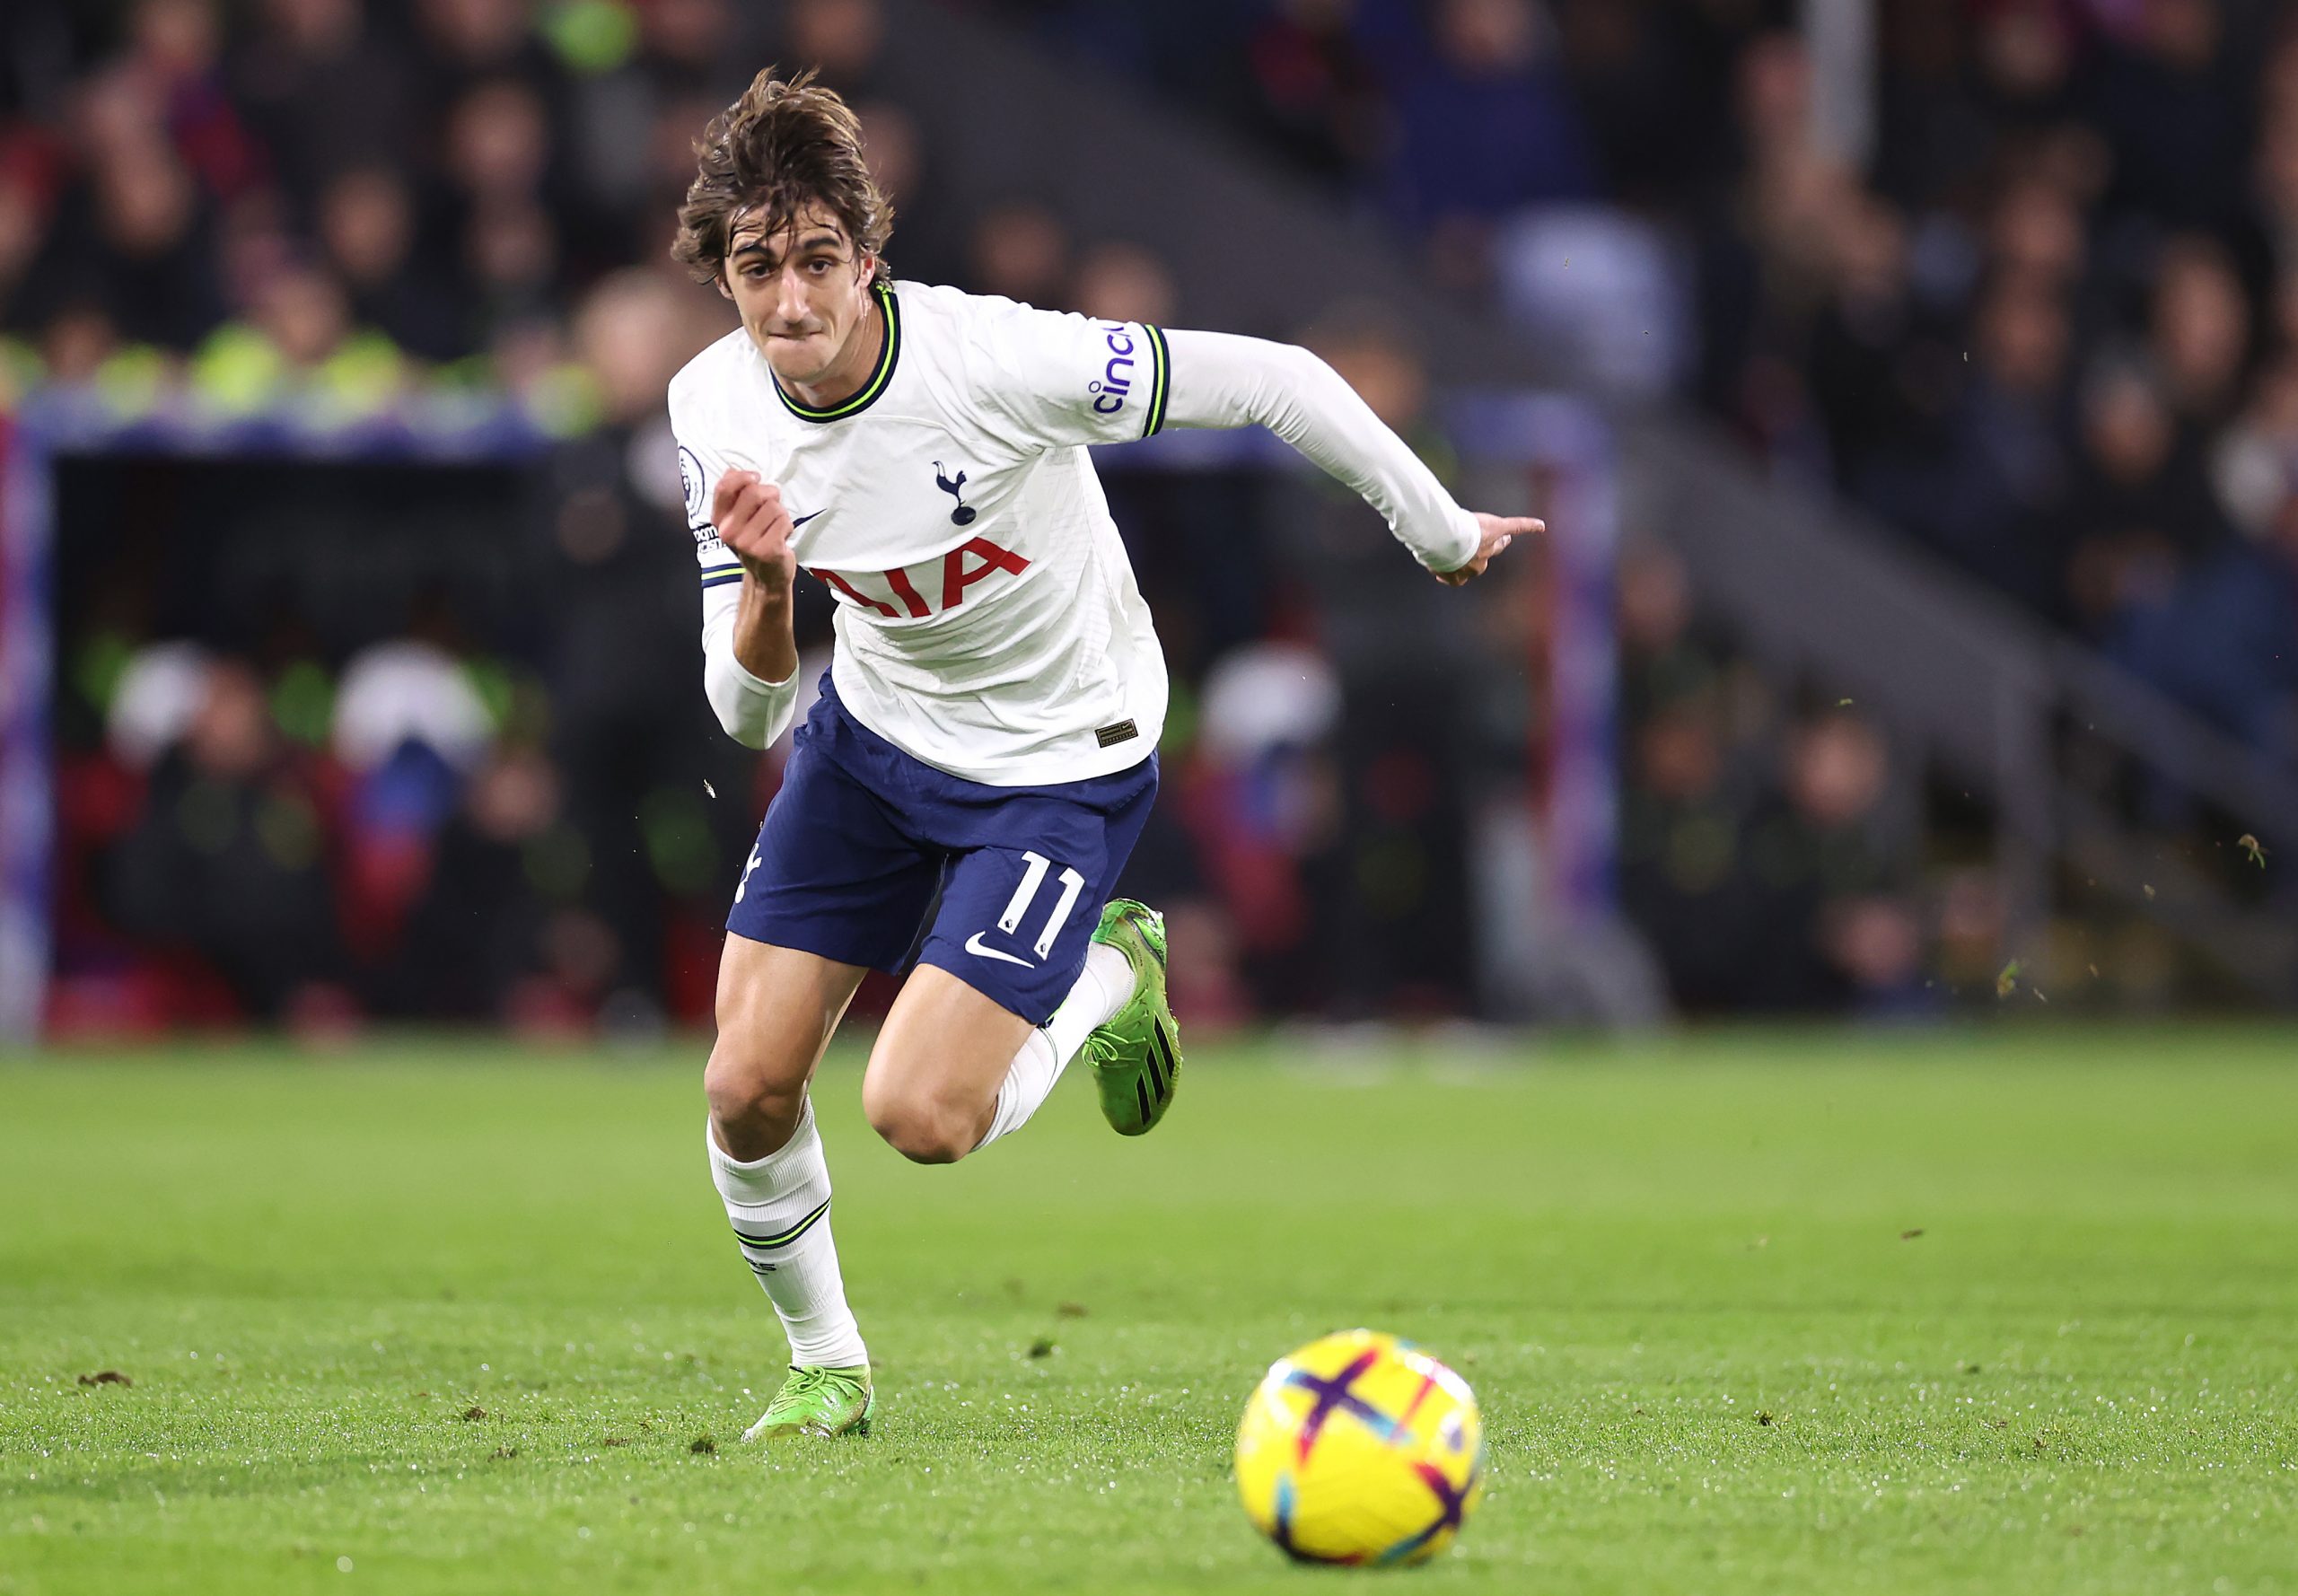 Dean Jones expects Tottenham Hotspur winger Bryan Gil to be moved on in the summer